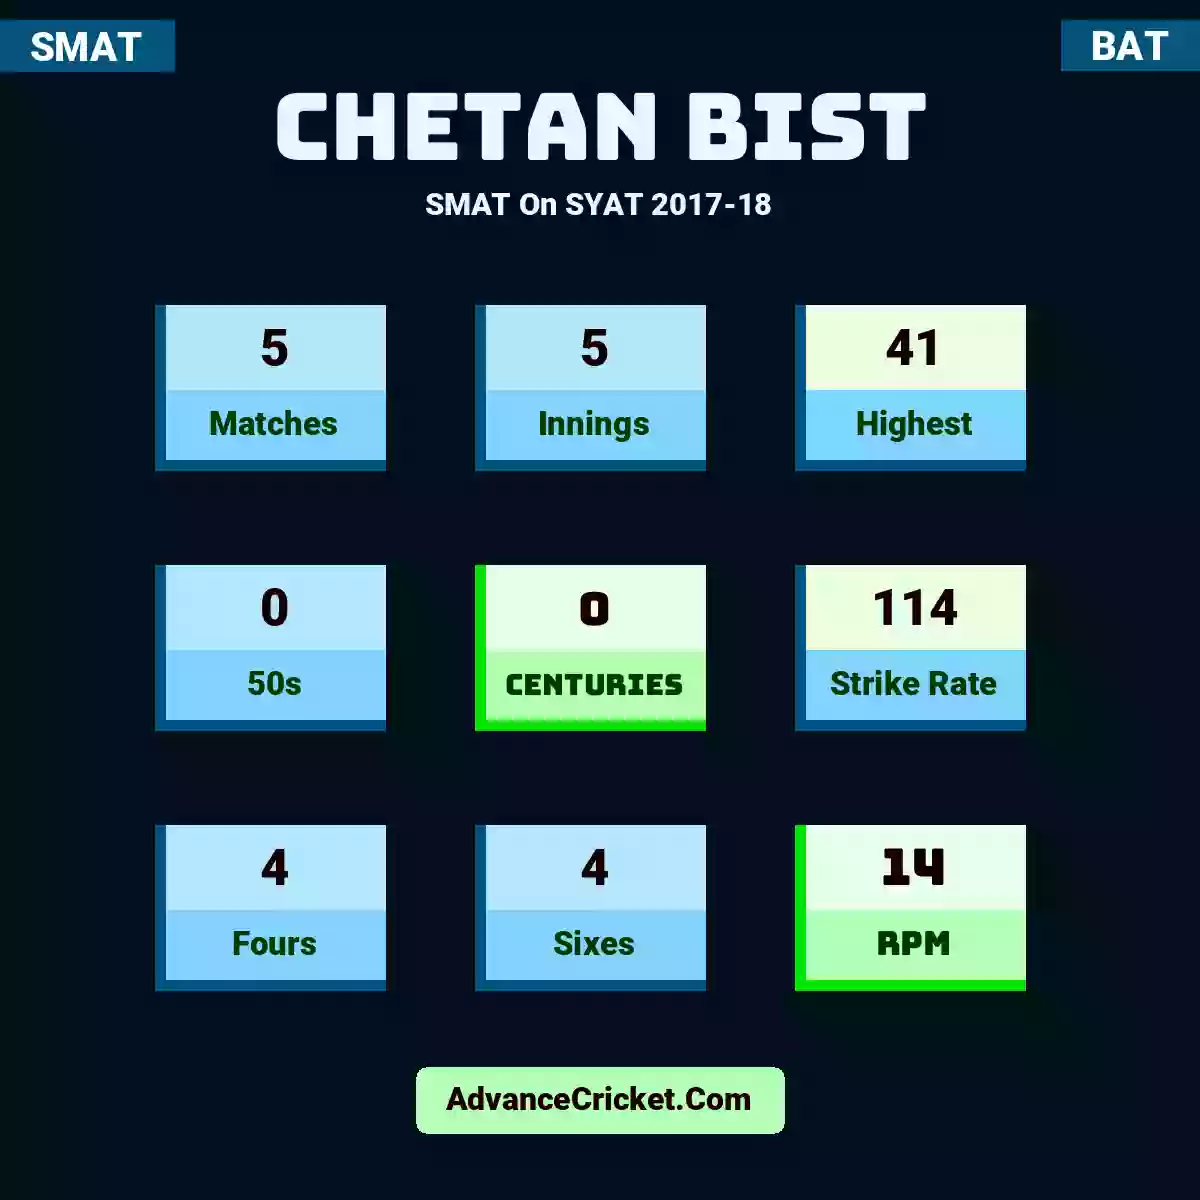 Chetan Bist SMAT  On SYAT 2017-18, Chetan Bist played 5 matches, scored 41 runs as highest, 0 half-centuries, and 0 centuries, with a strike rate of 114. C.Bist hit 4 fours and 4 sixes, with an RPM of 14.